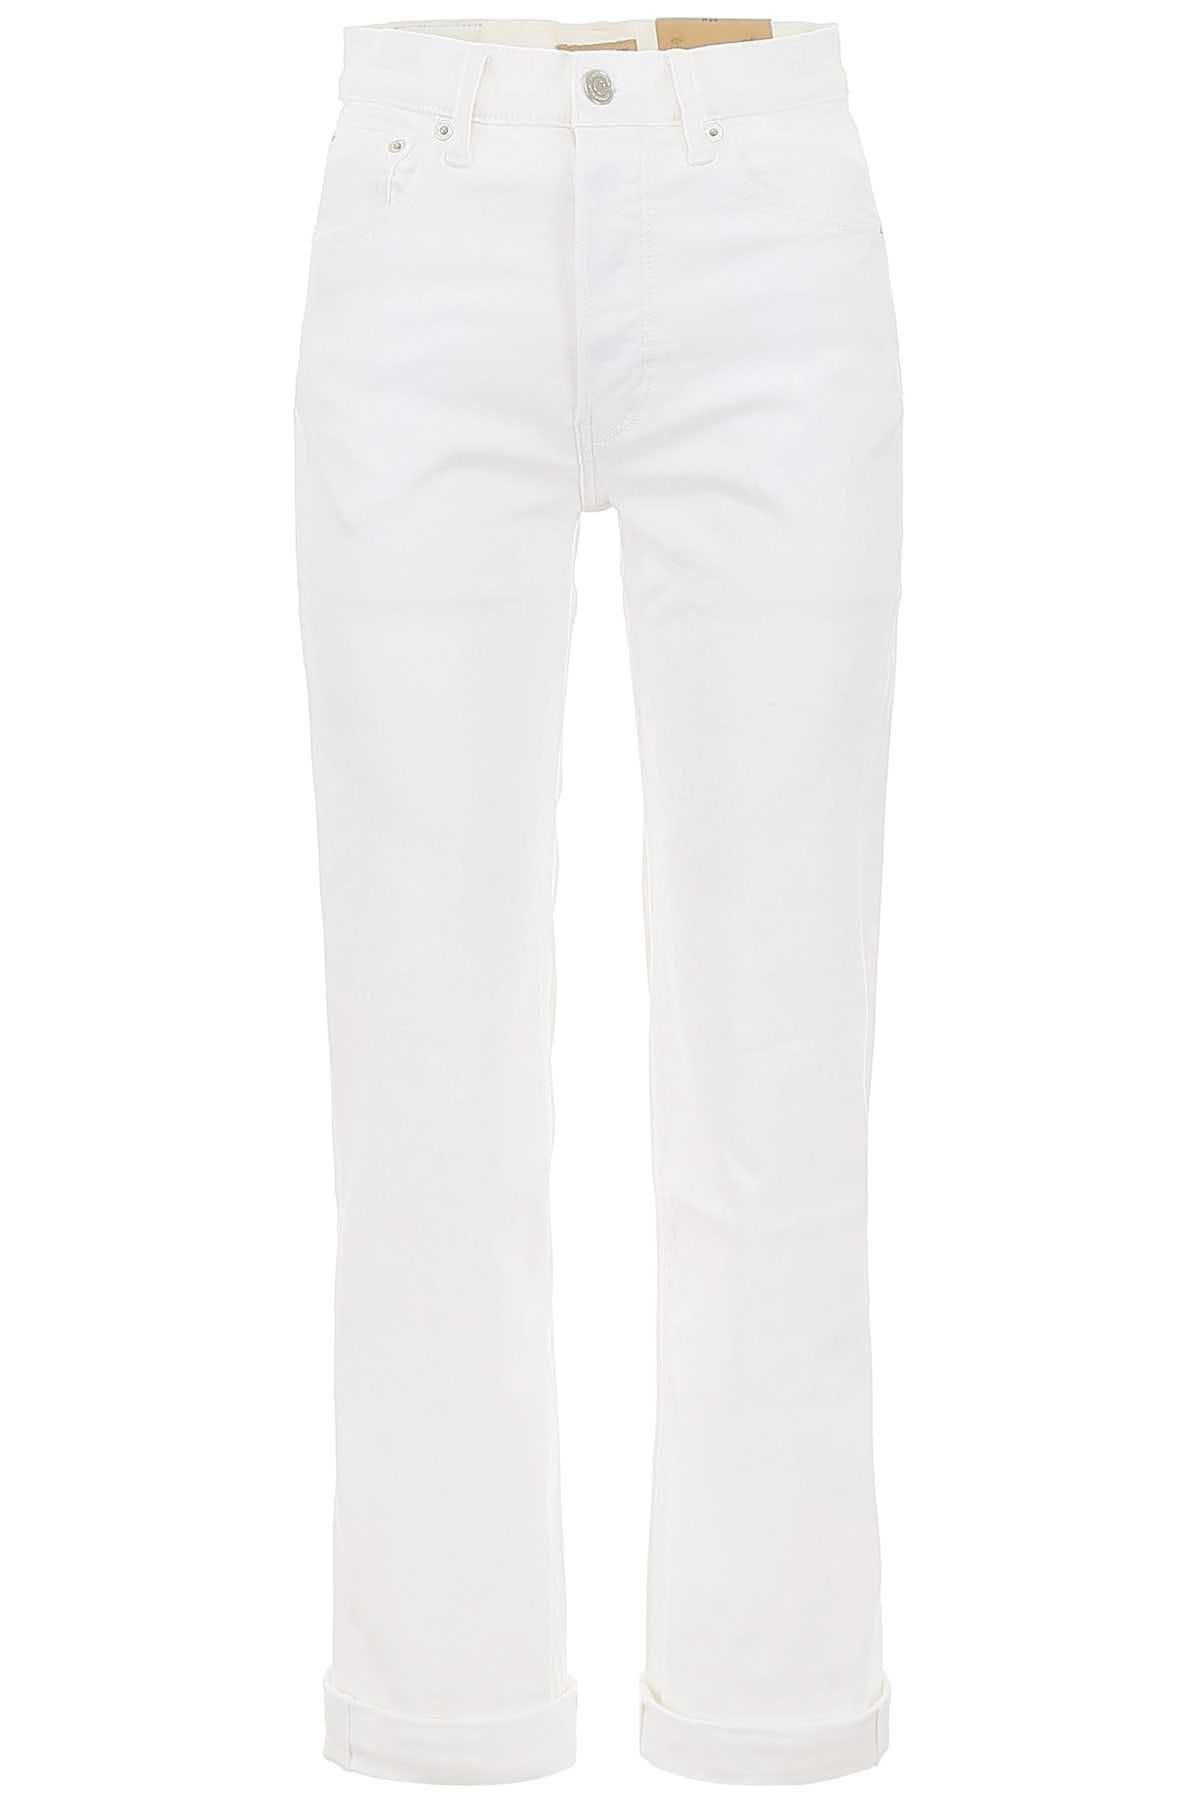 burberry jeans white